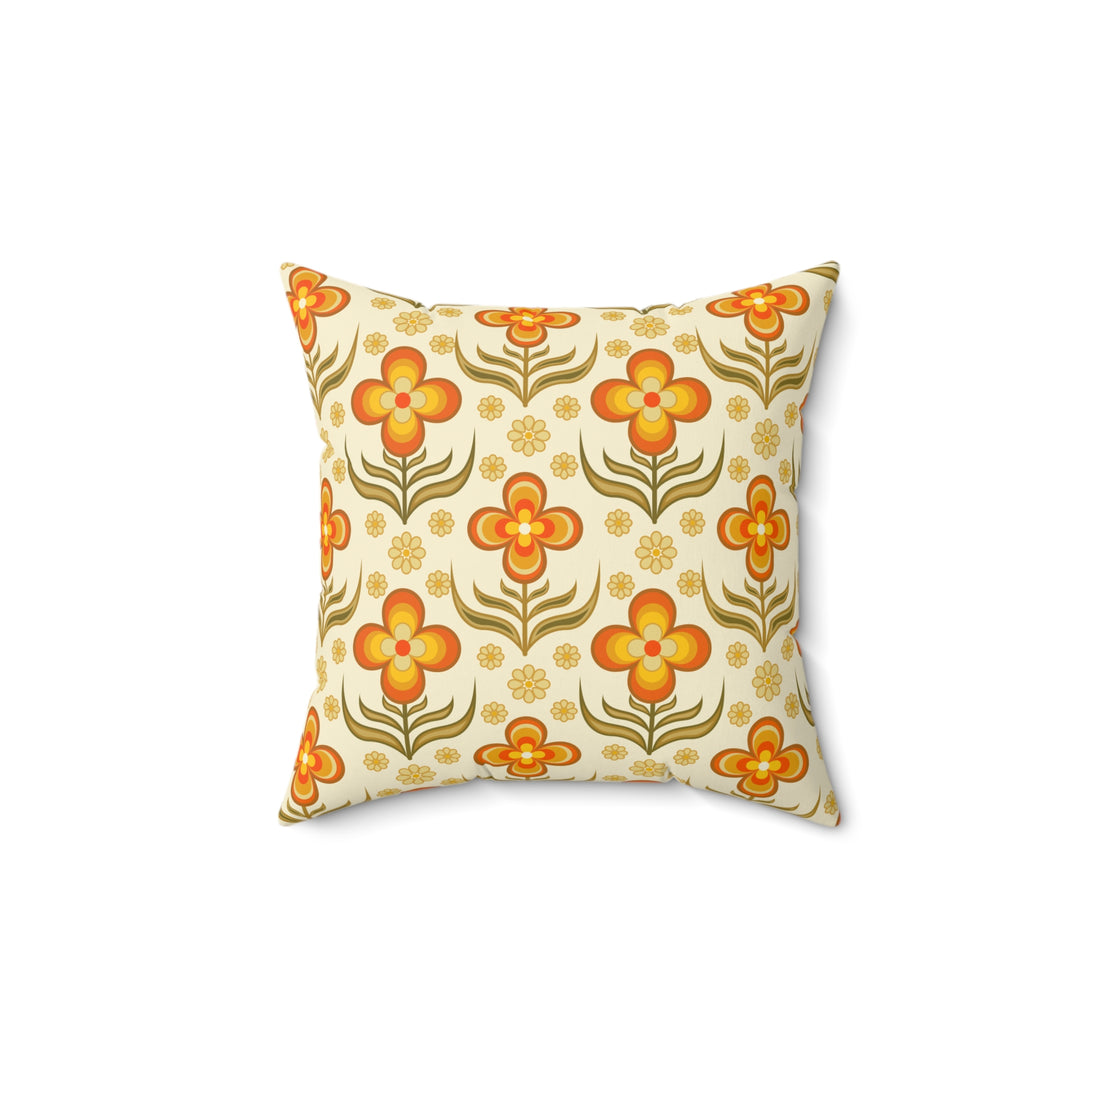 70s Retro Groovy Flower Power Floral Orange, Yellow Green Pillow And Cover